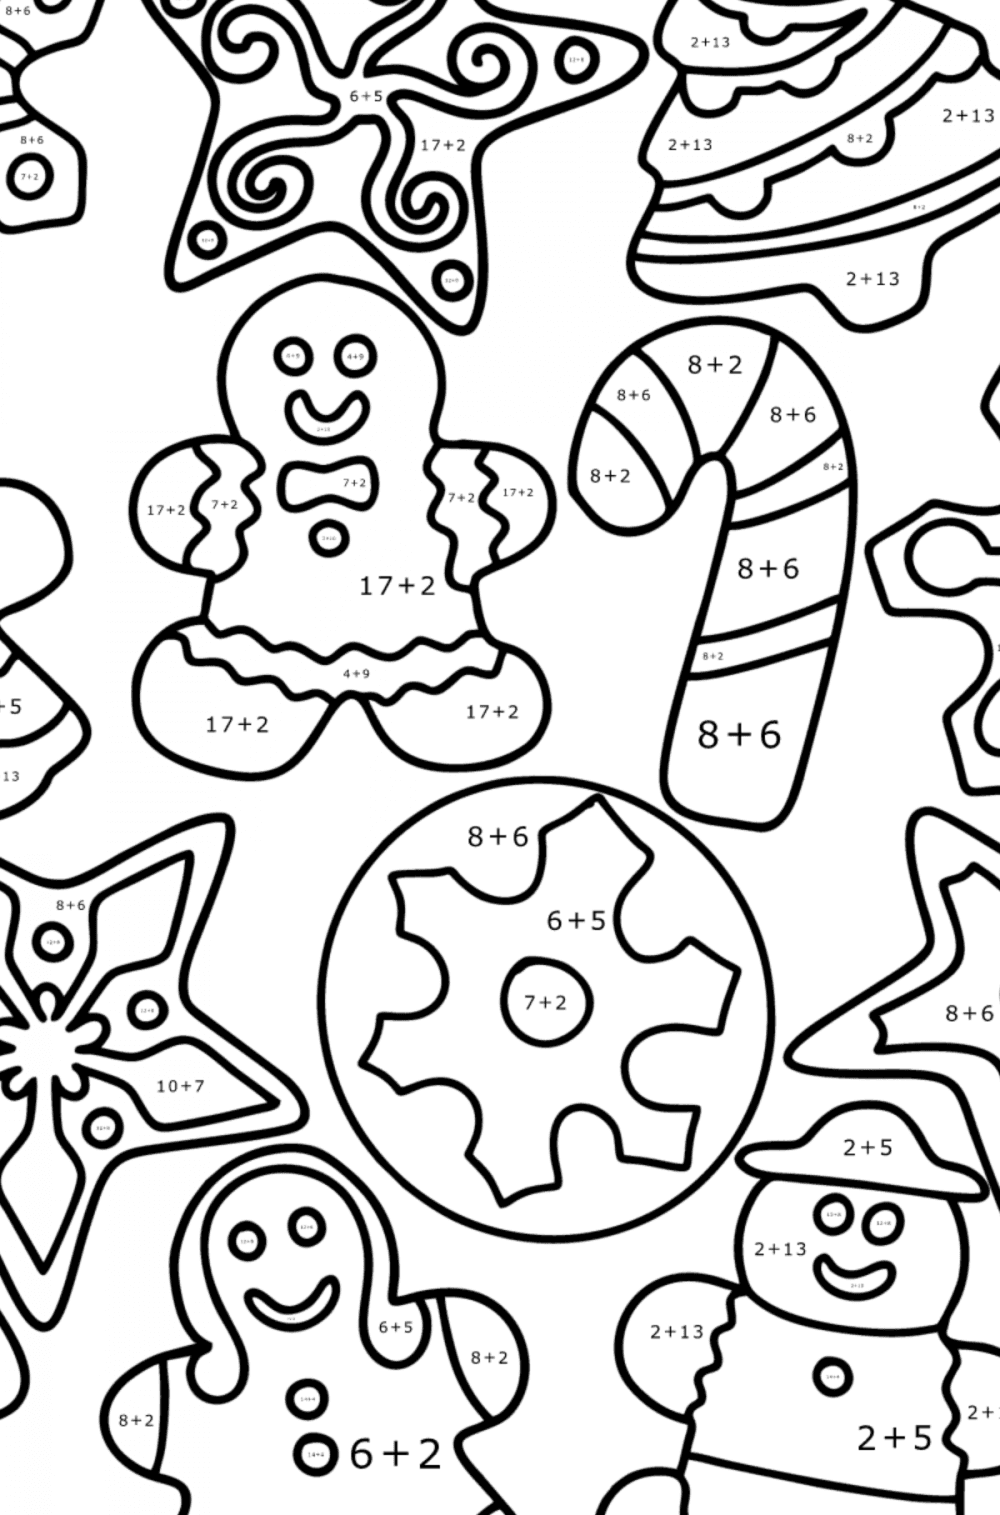 Popular Coloring Pages for Adults ♥ get filled with positive emotions!